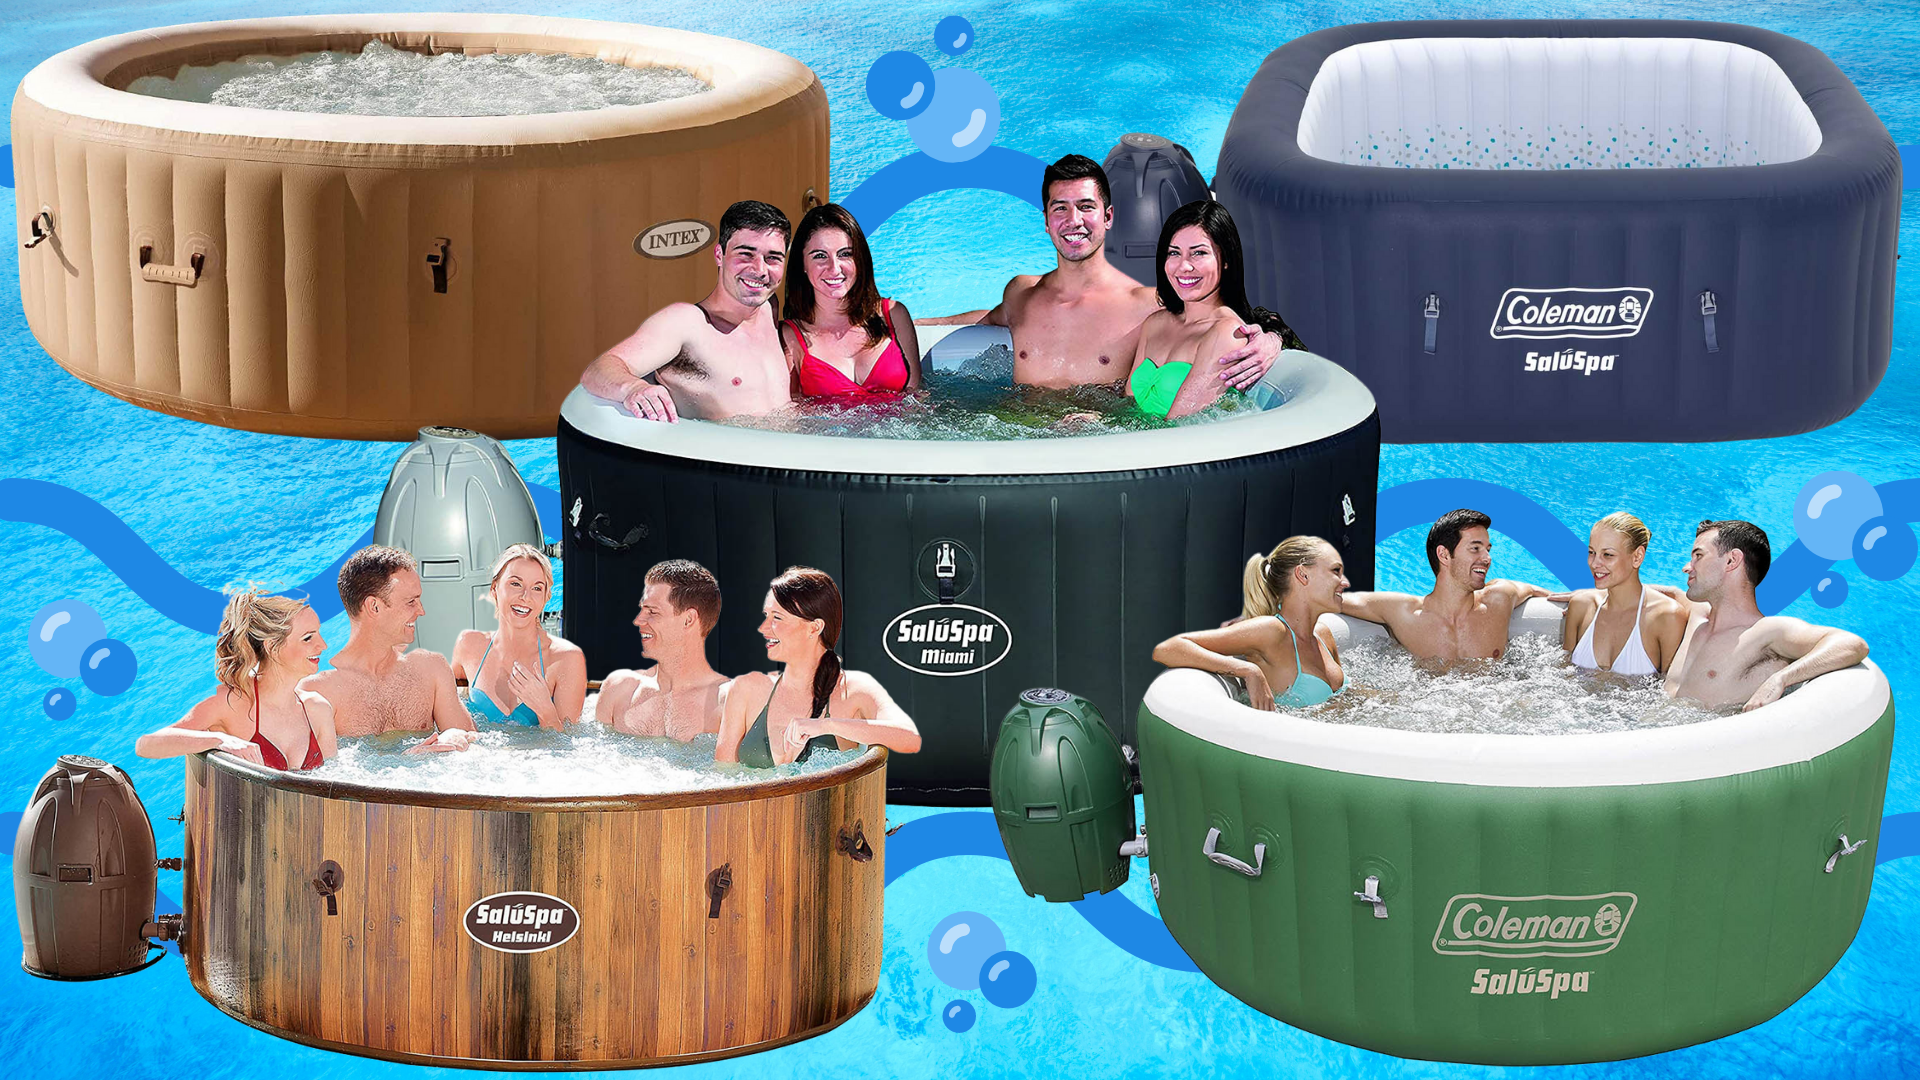 https://www.firstforwomen.com/wp-content/uploads/sites/2/2021/04/best-inflatable-hot-tubs.png